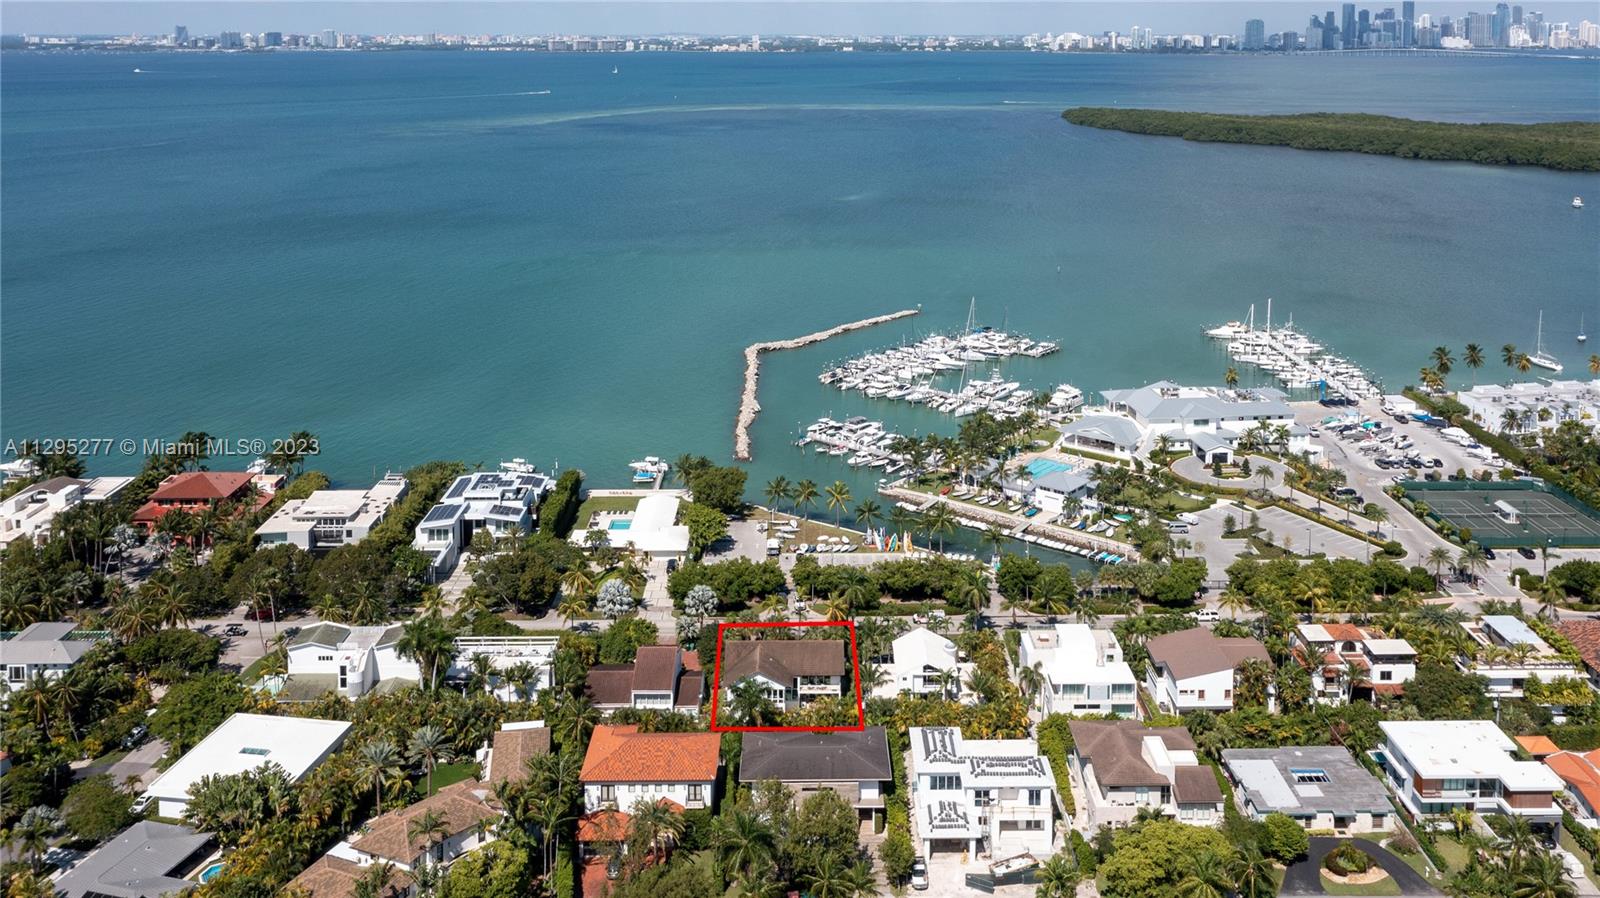 UNIQUE LOCATION IN FRONT OF KEY BISCAYNE YACHT CLUB. ONE OF 8 HOMES FACING KEY BISCAYNE YACHT CLUB.